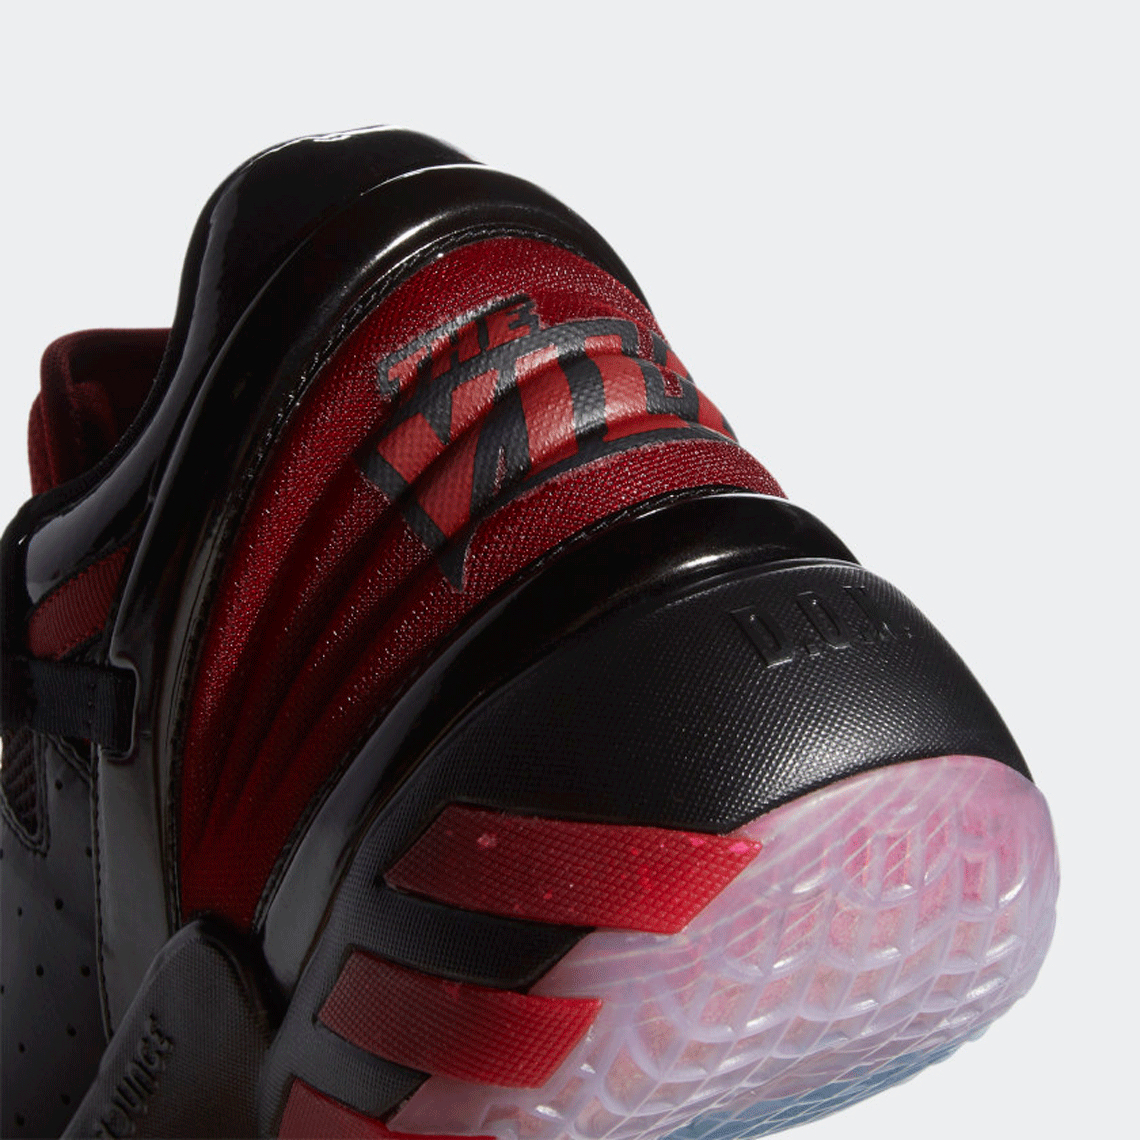 adidas DON Issue 2 Louisville FY6121 Release Info